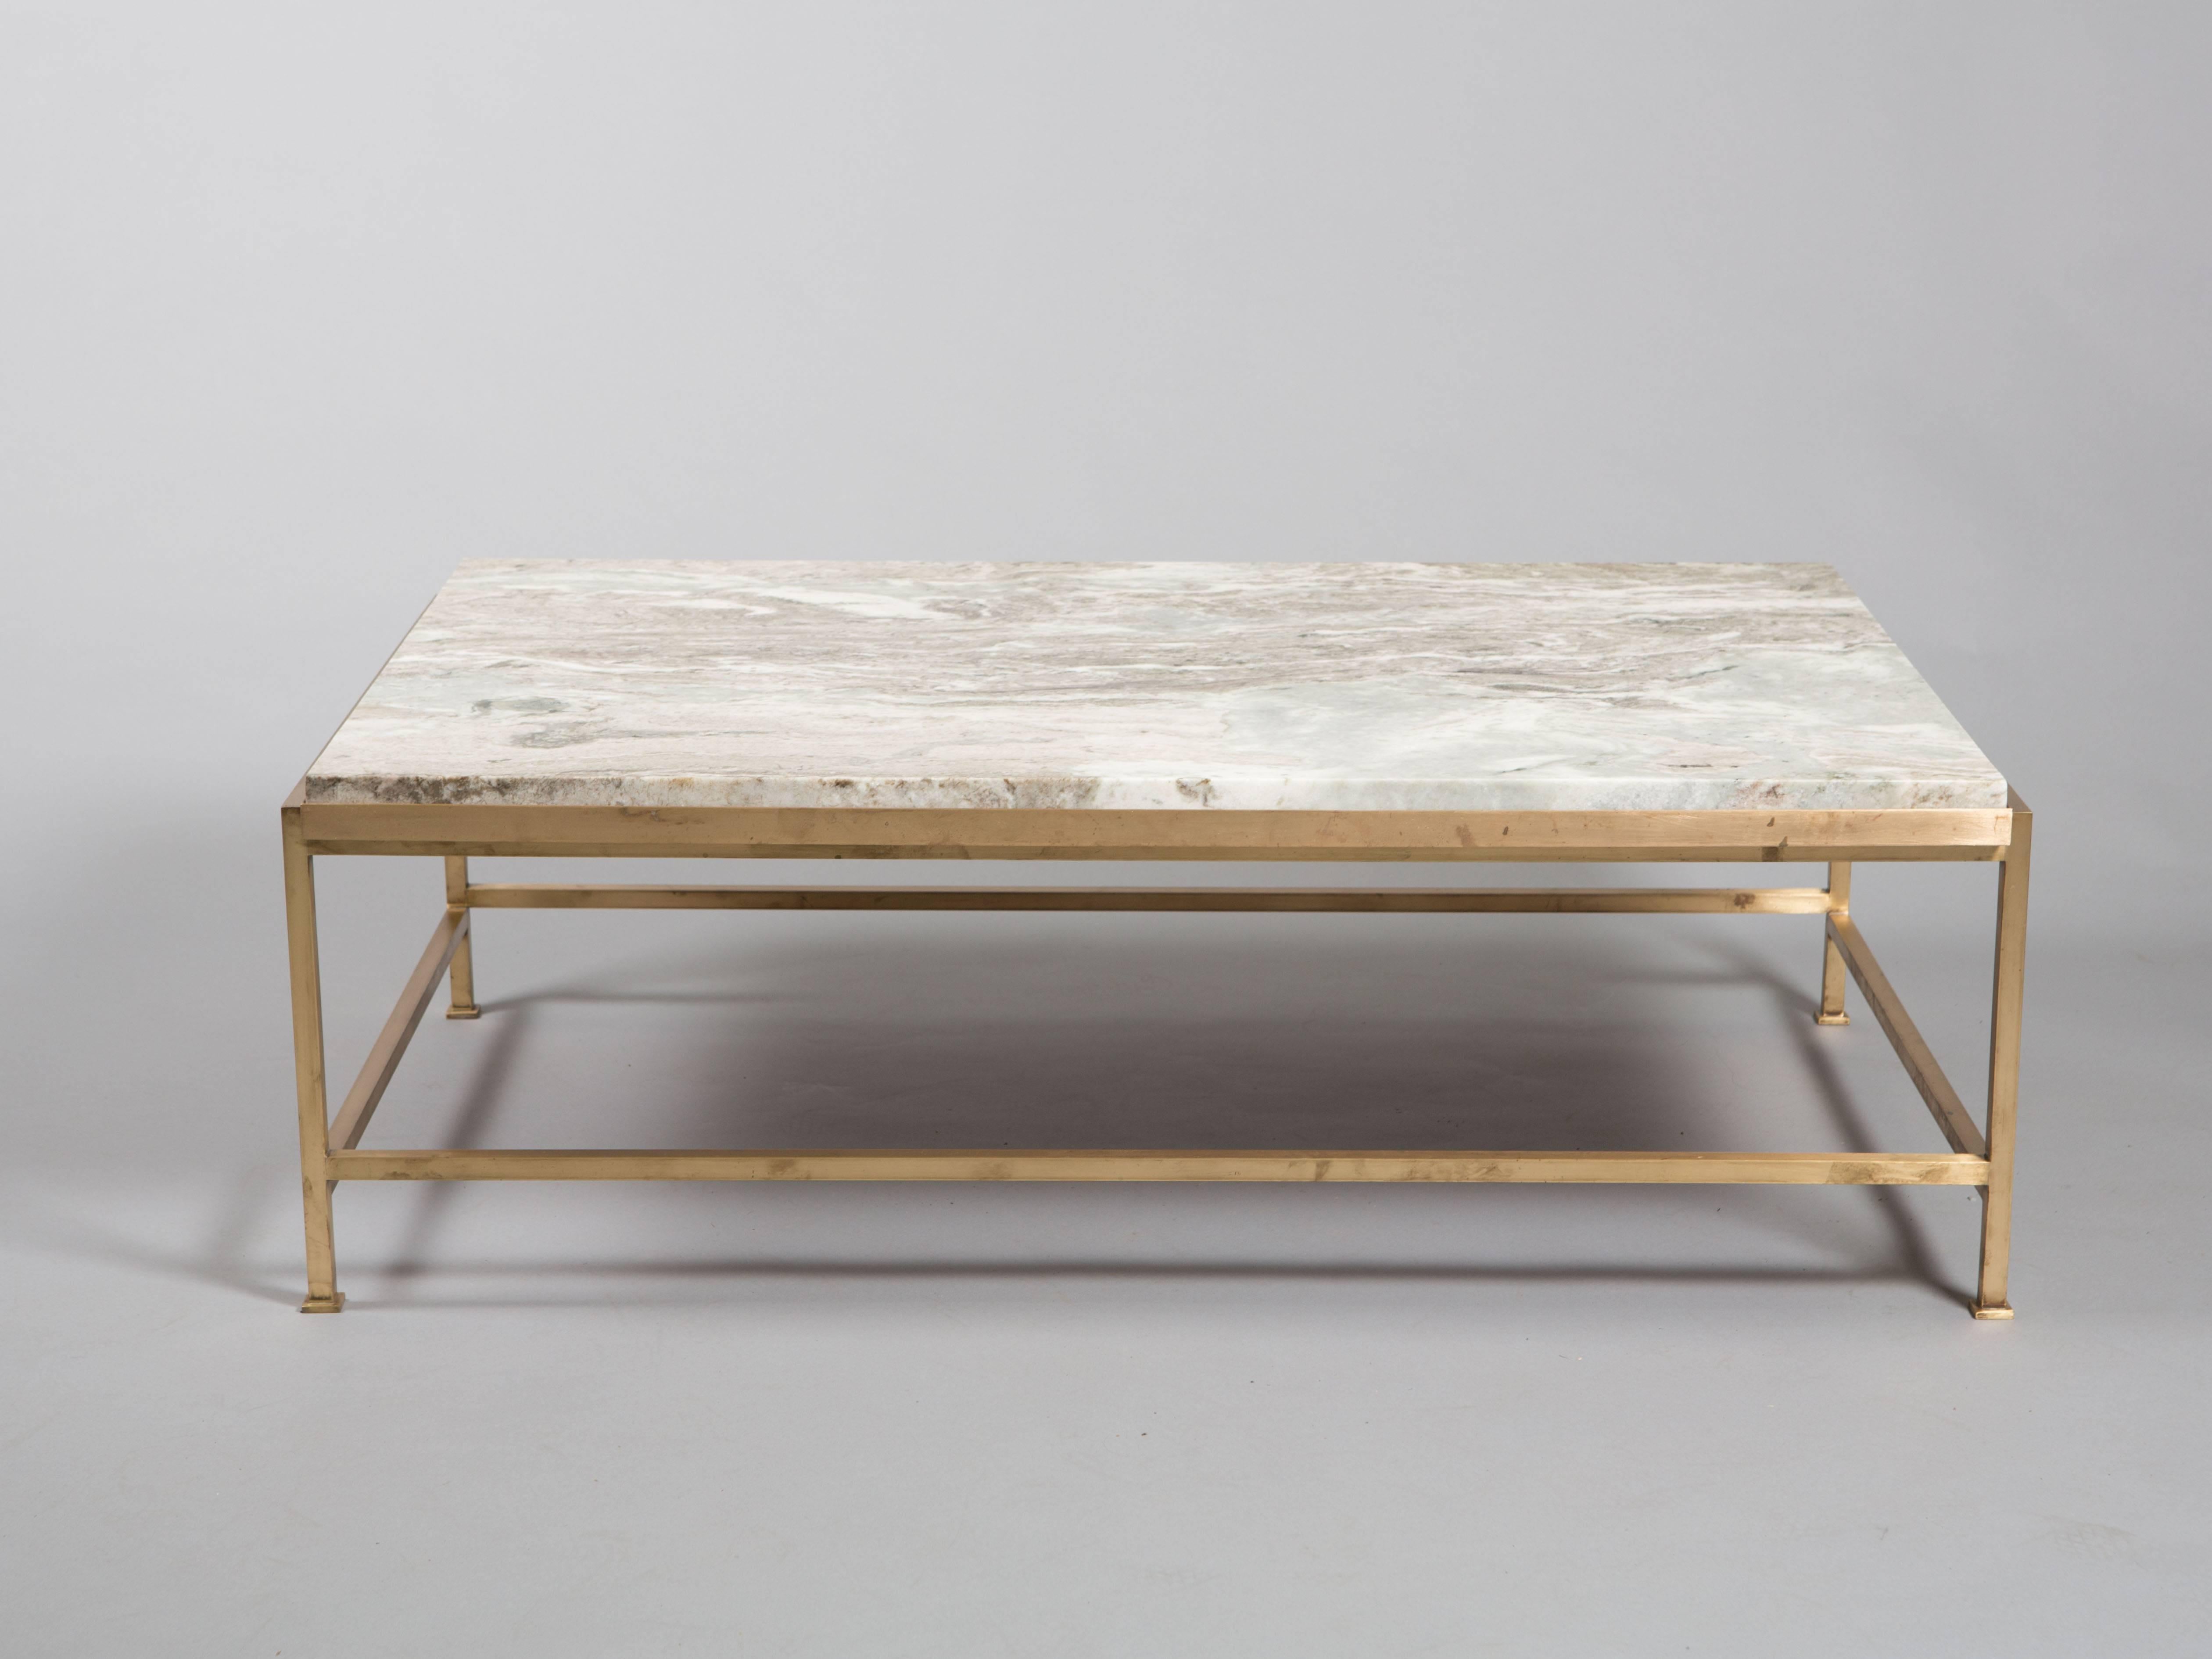 Paul McCobb brass coffee table produced for a residence in Connecticut. Cracked original top upgraded with a substantial piece of cut marble. Amazing custom size that isn't easily found. Re-polished base with some oxidation showing just the right